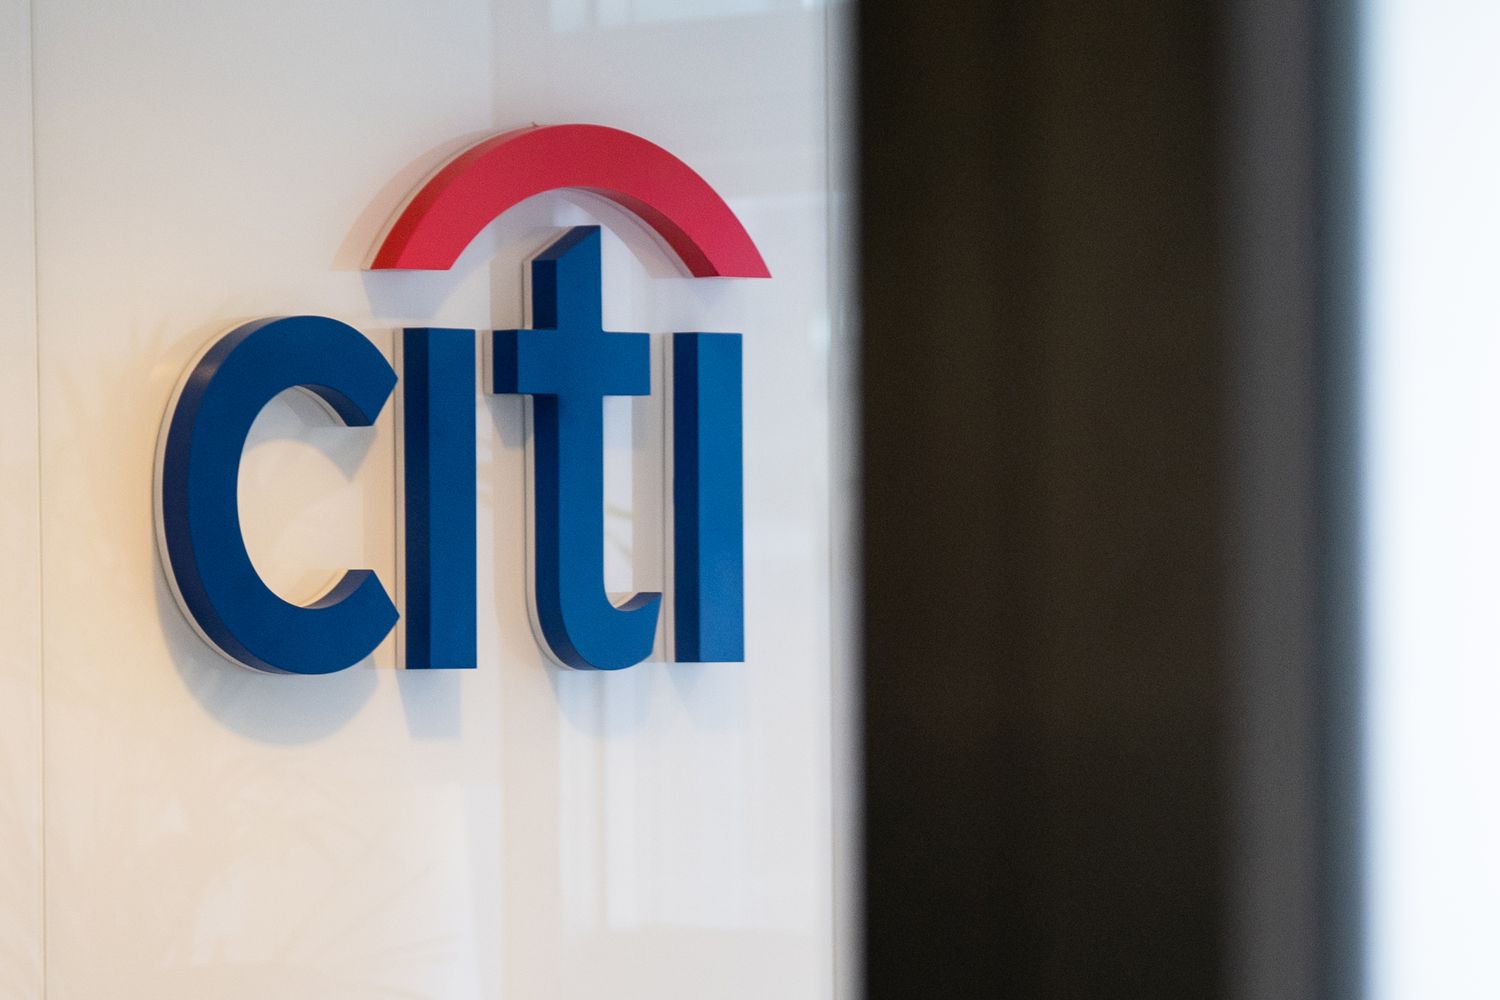 Citi Posts Q1 Earnings Beat on Booming Investment Banking Fees, Restructuring Ends [Video]